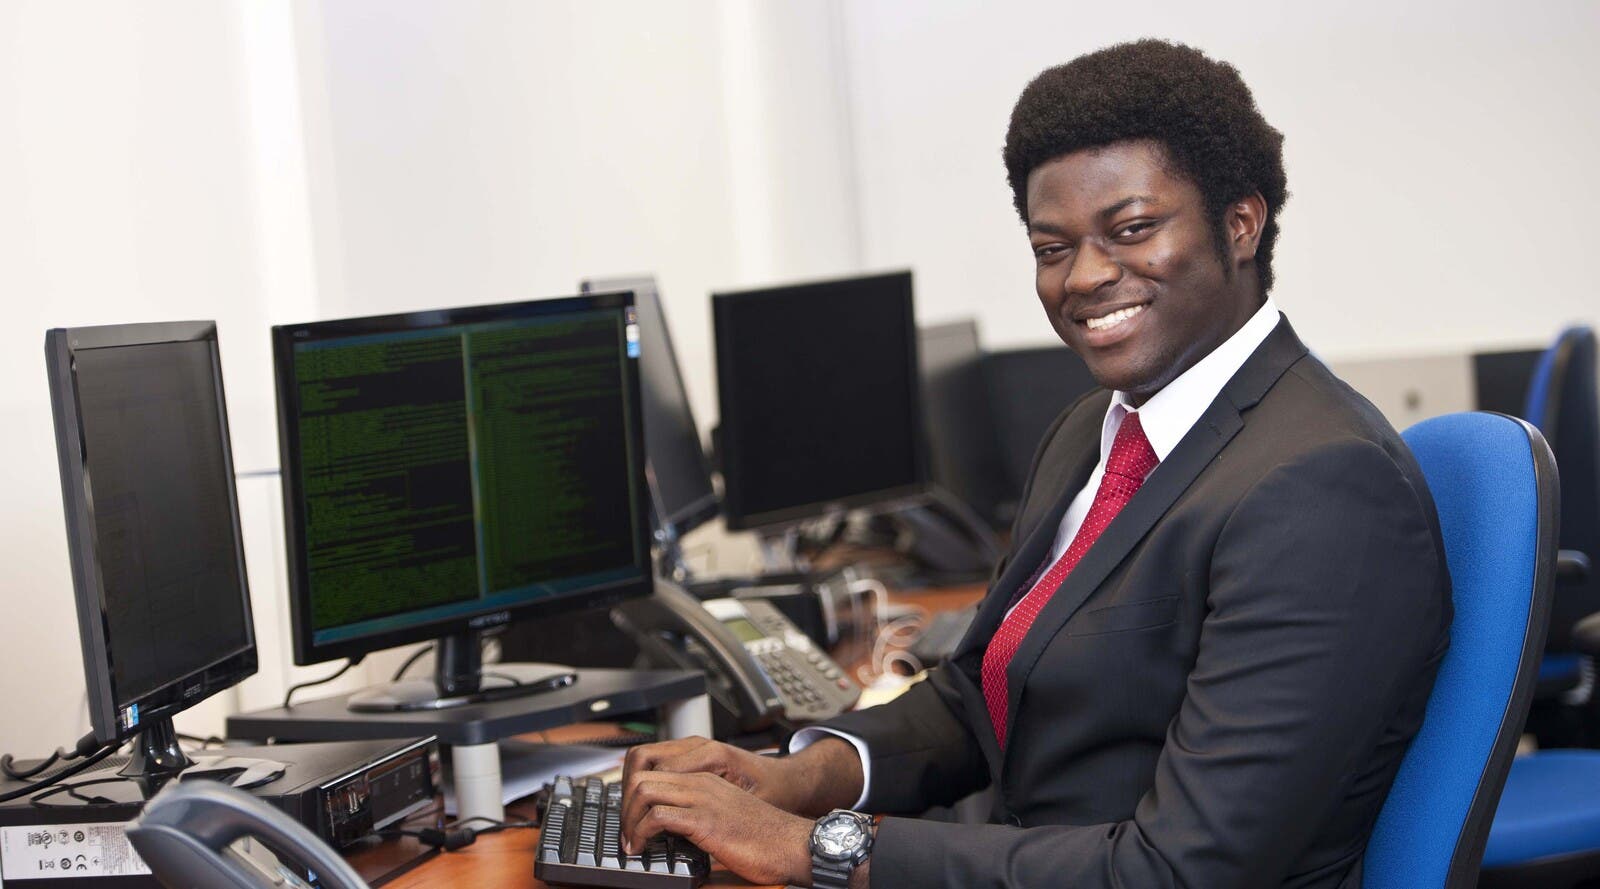 Student working at computer in an office